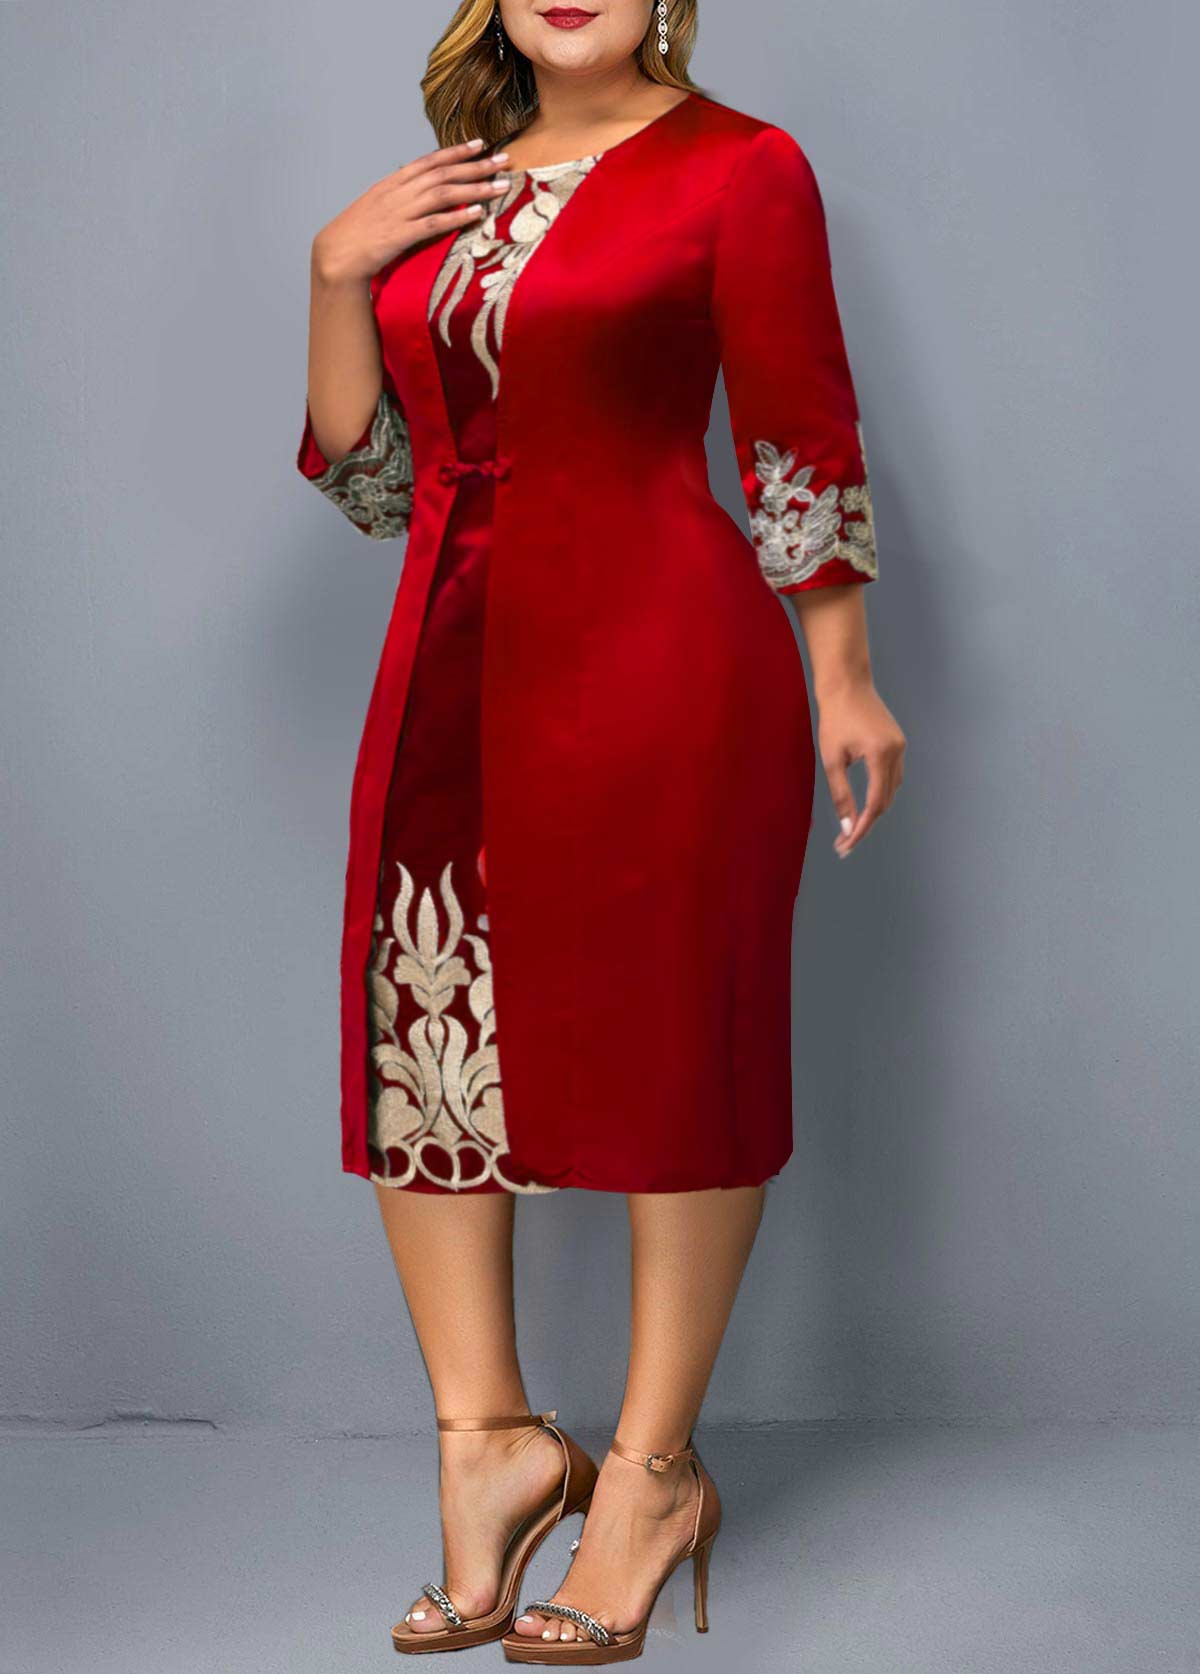 Round Neck 3/4 Sleeve Embroidered Red Dress